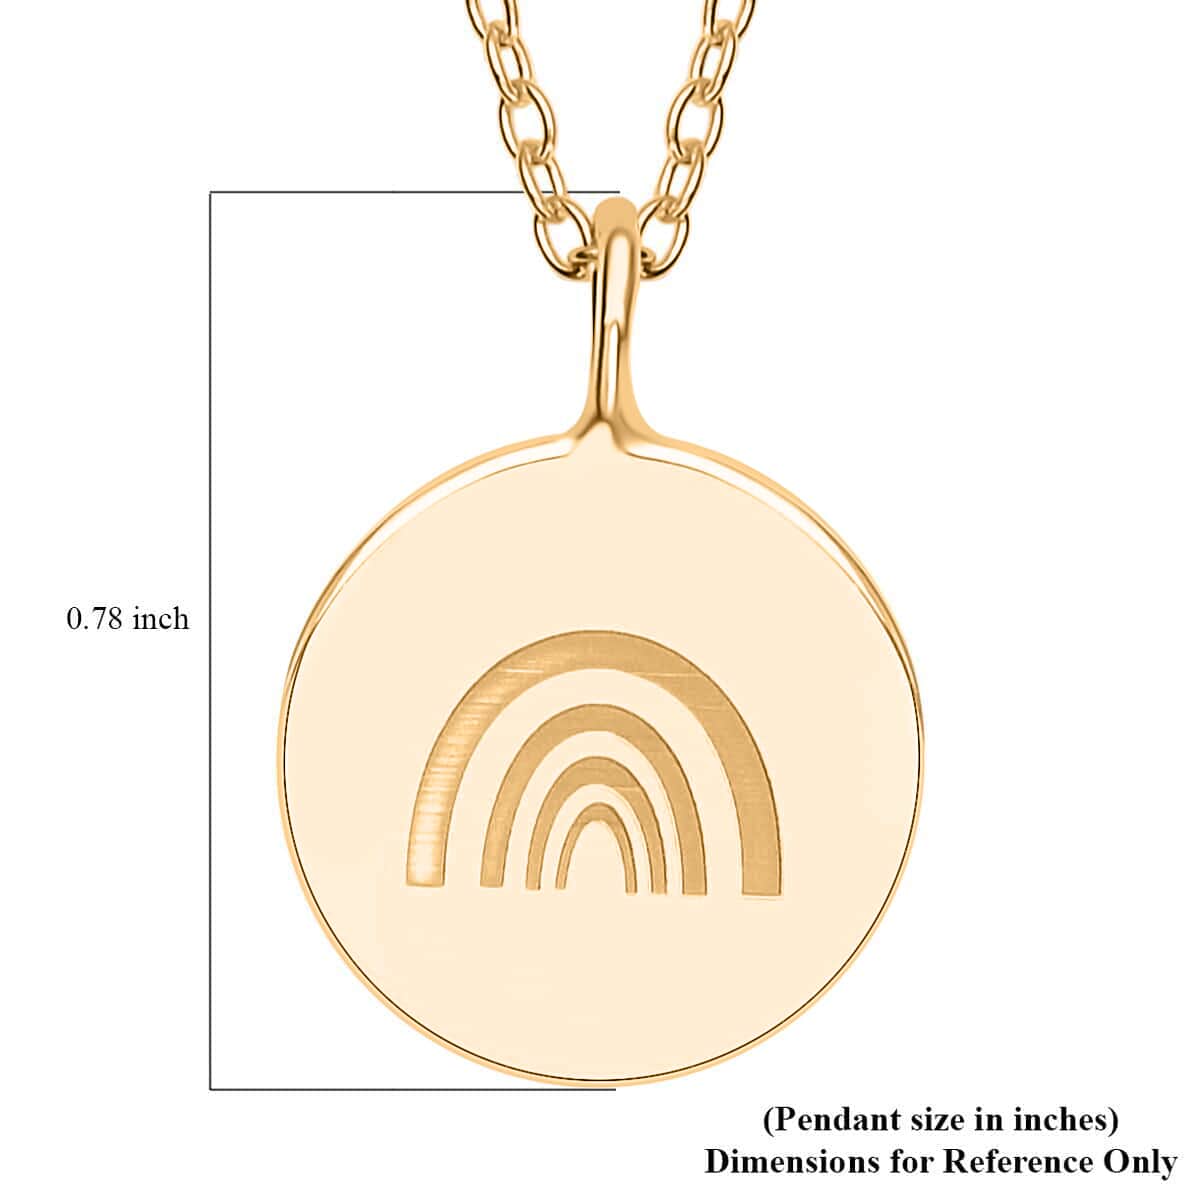 Rainbow Sign Jewelry Gift Set Pendant Necklace 16-18 Inches in 14K Yellow Gold Over Sterling Silver 4.15 Grams image number 6